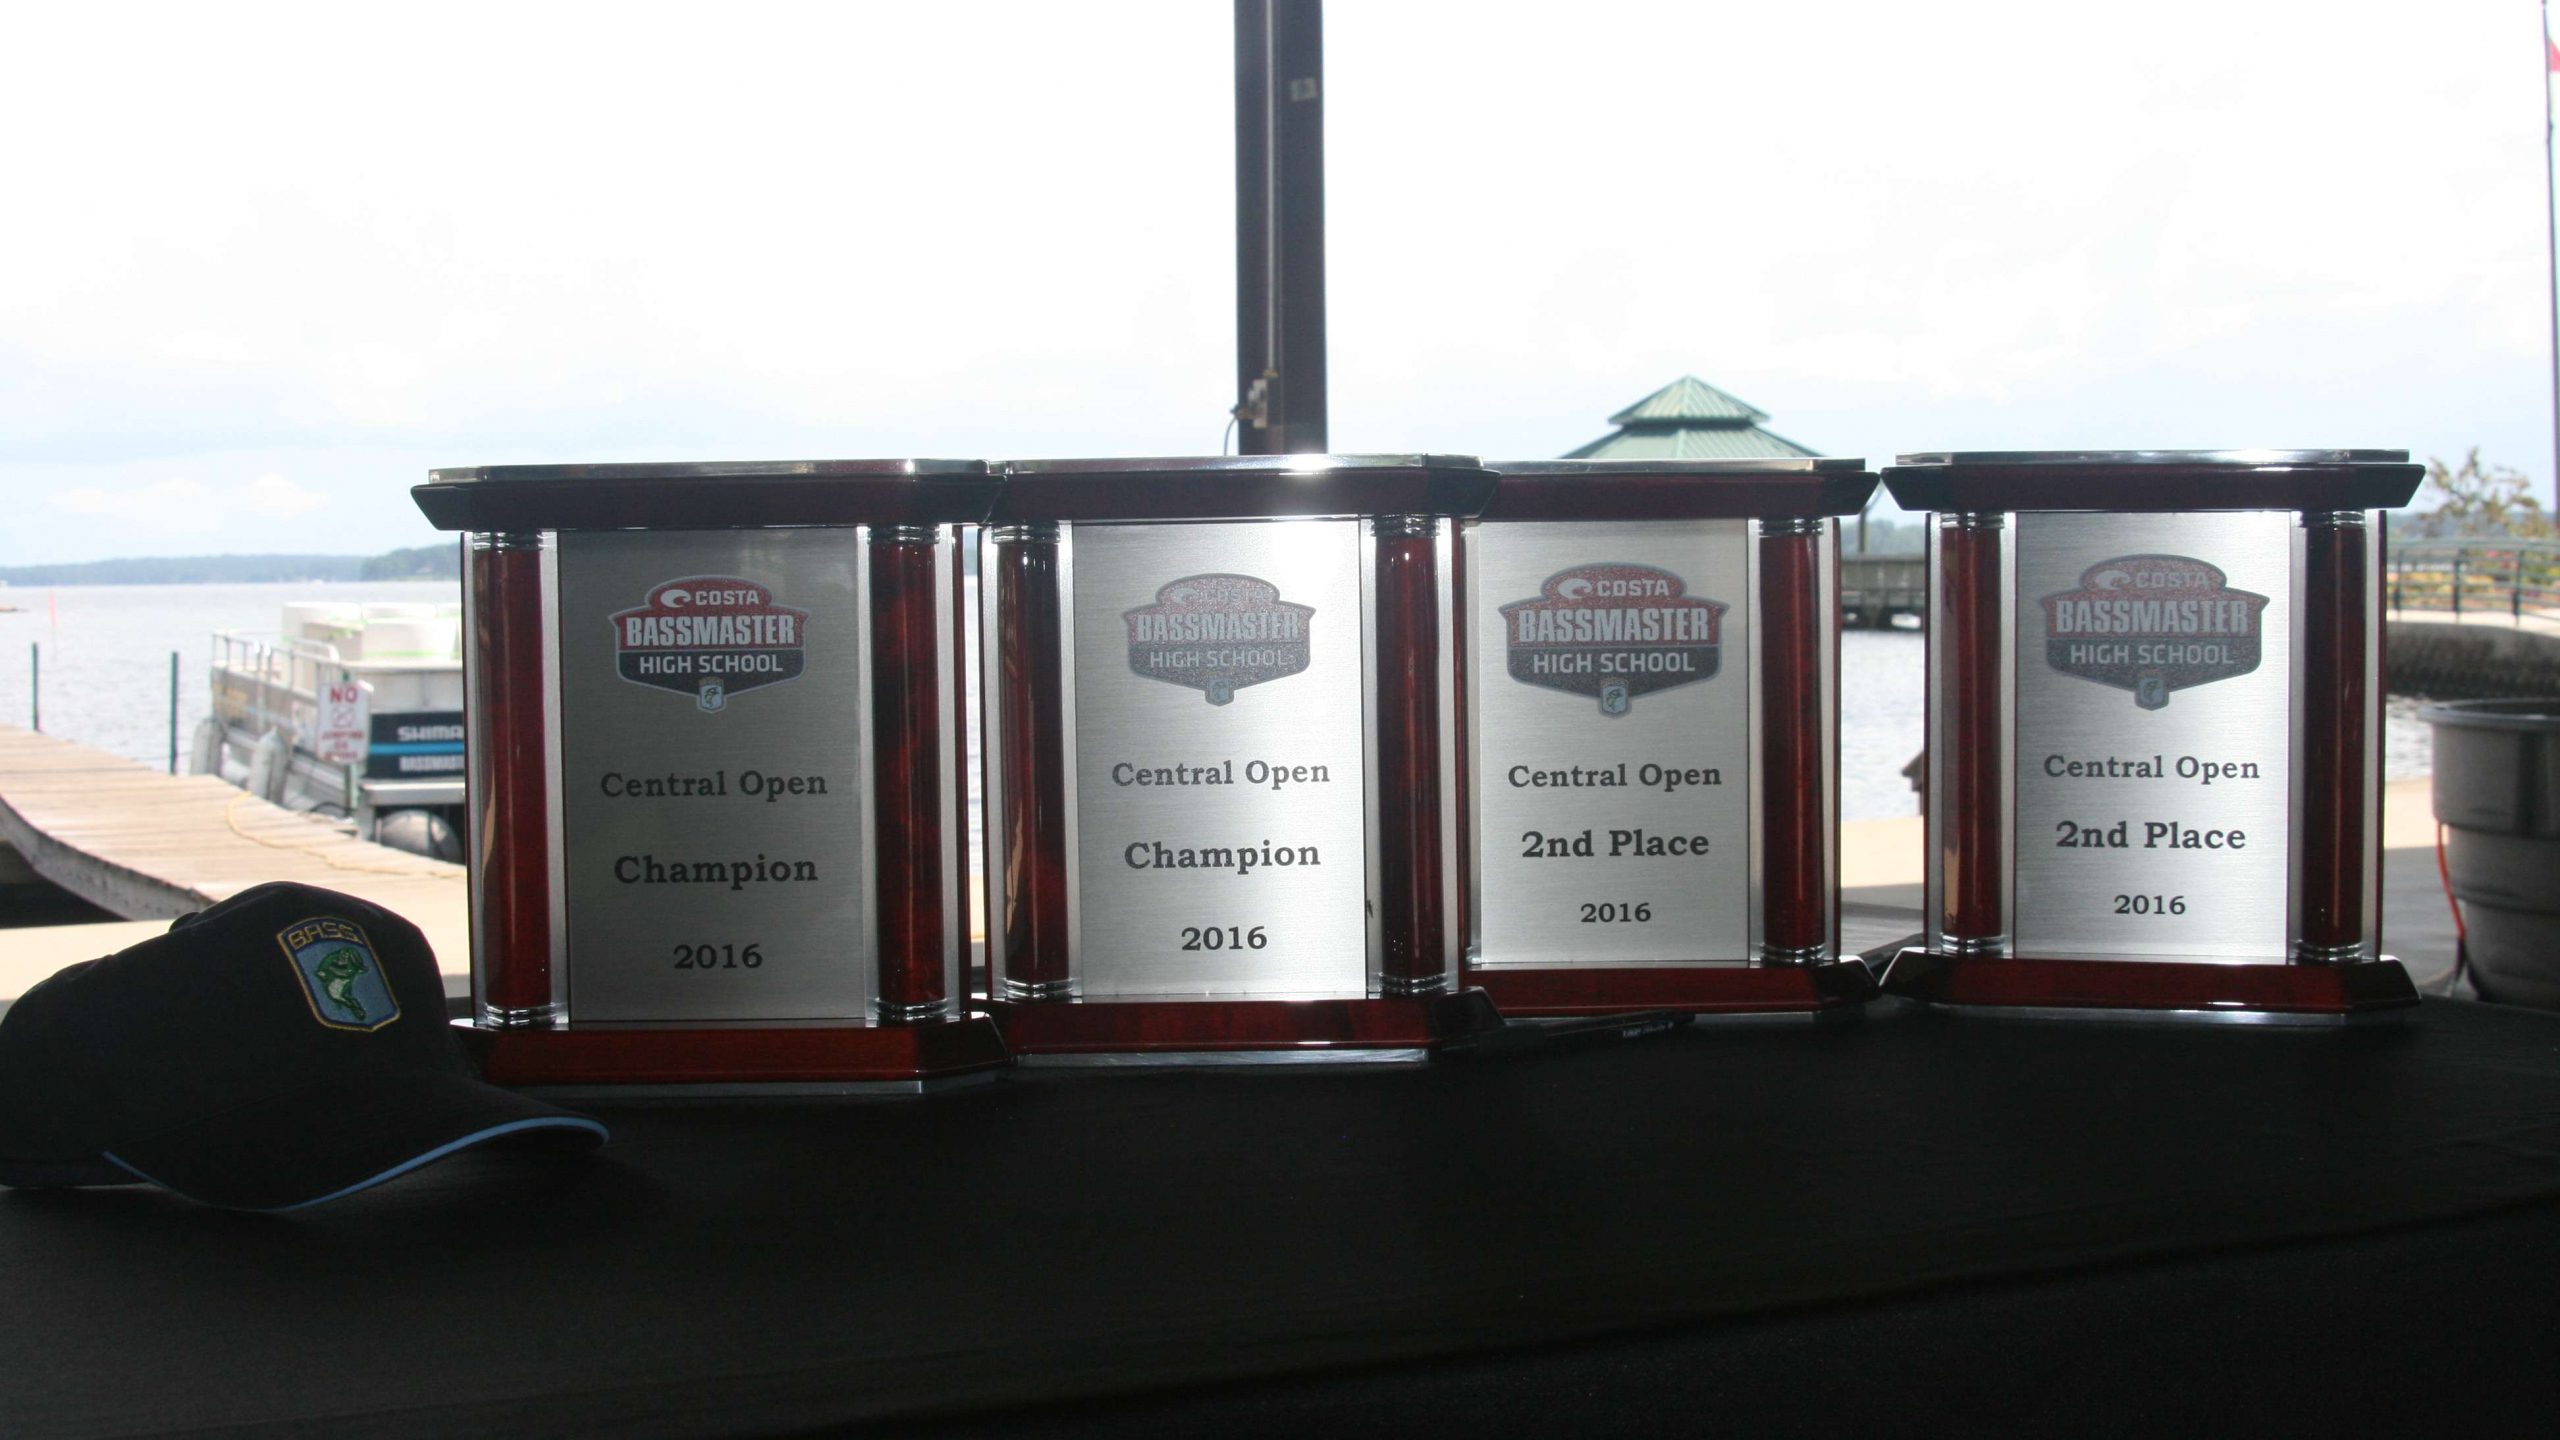 Some lucky anglers will bring home this hardware Monday afternoon, with prize money for their school teams.